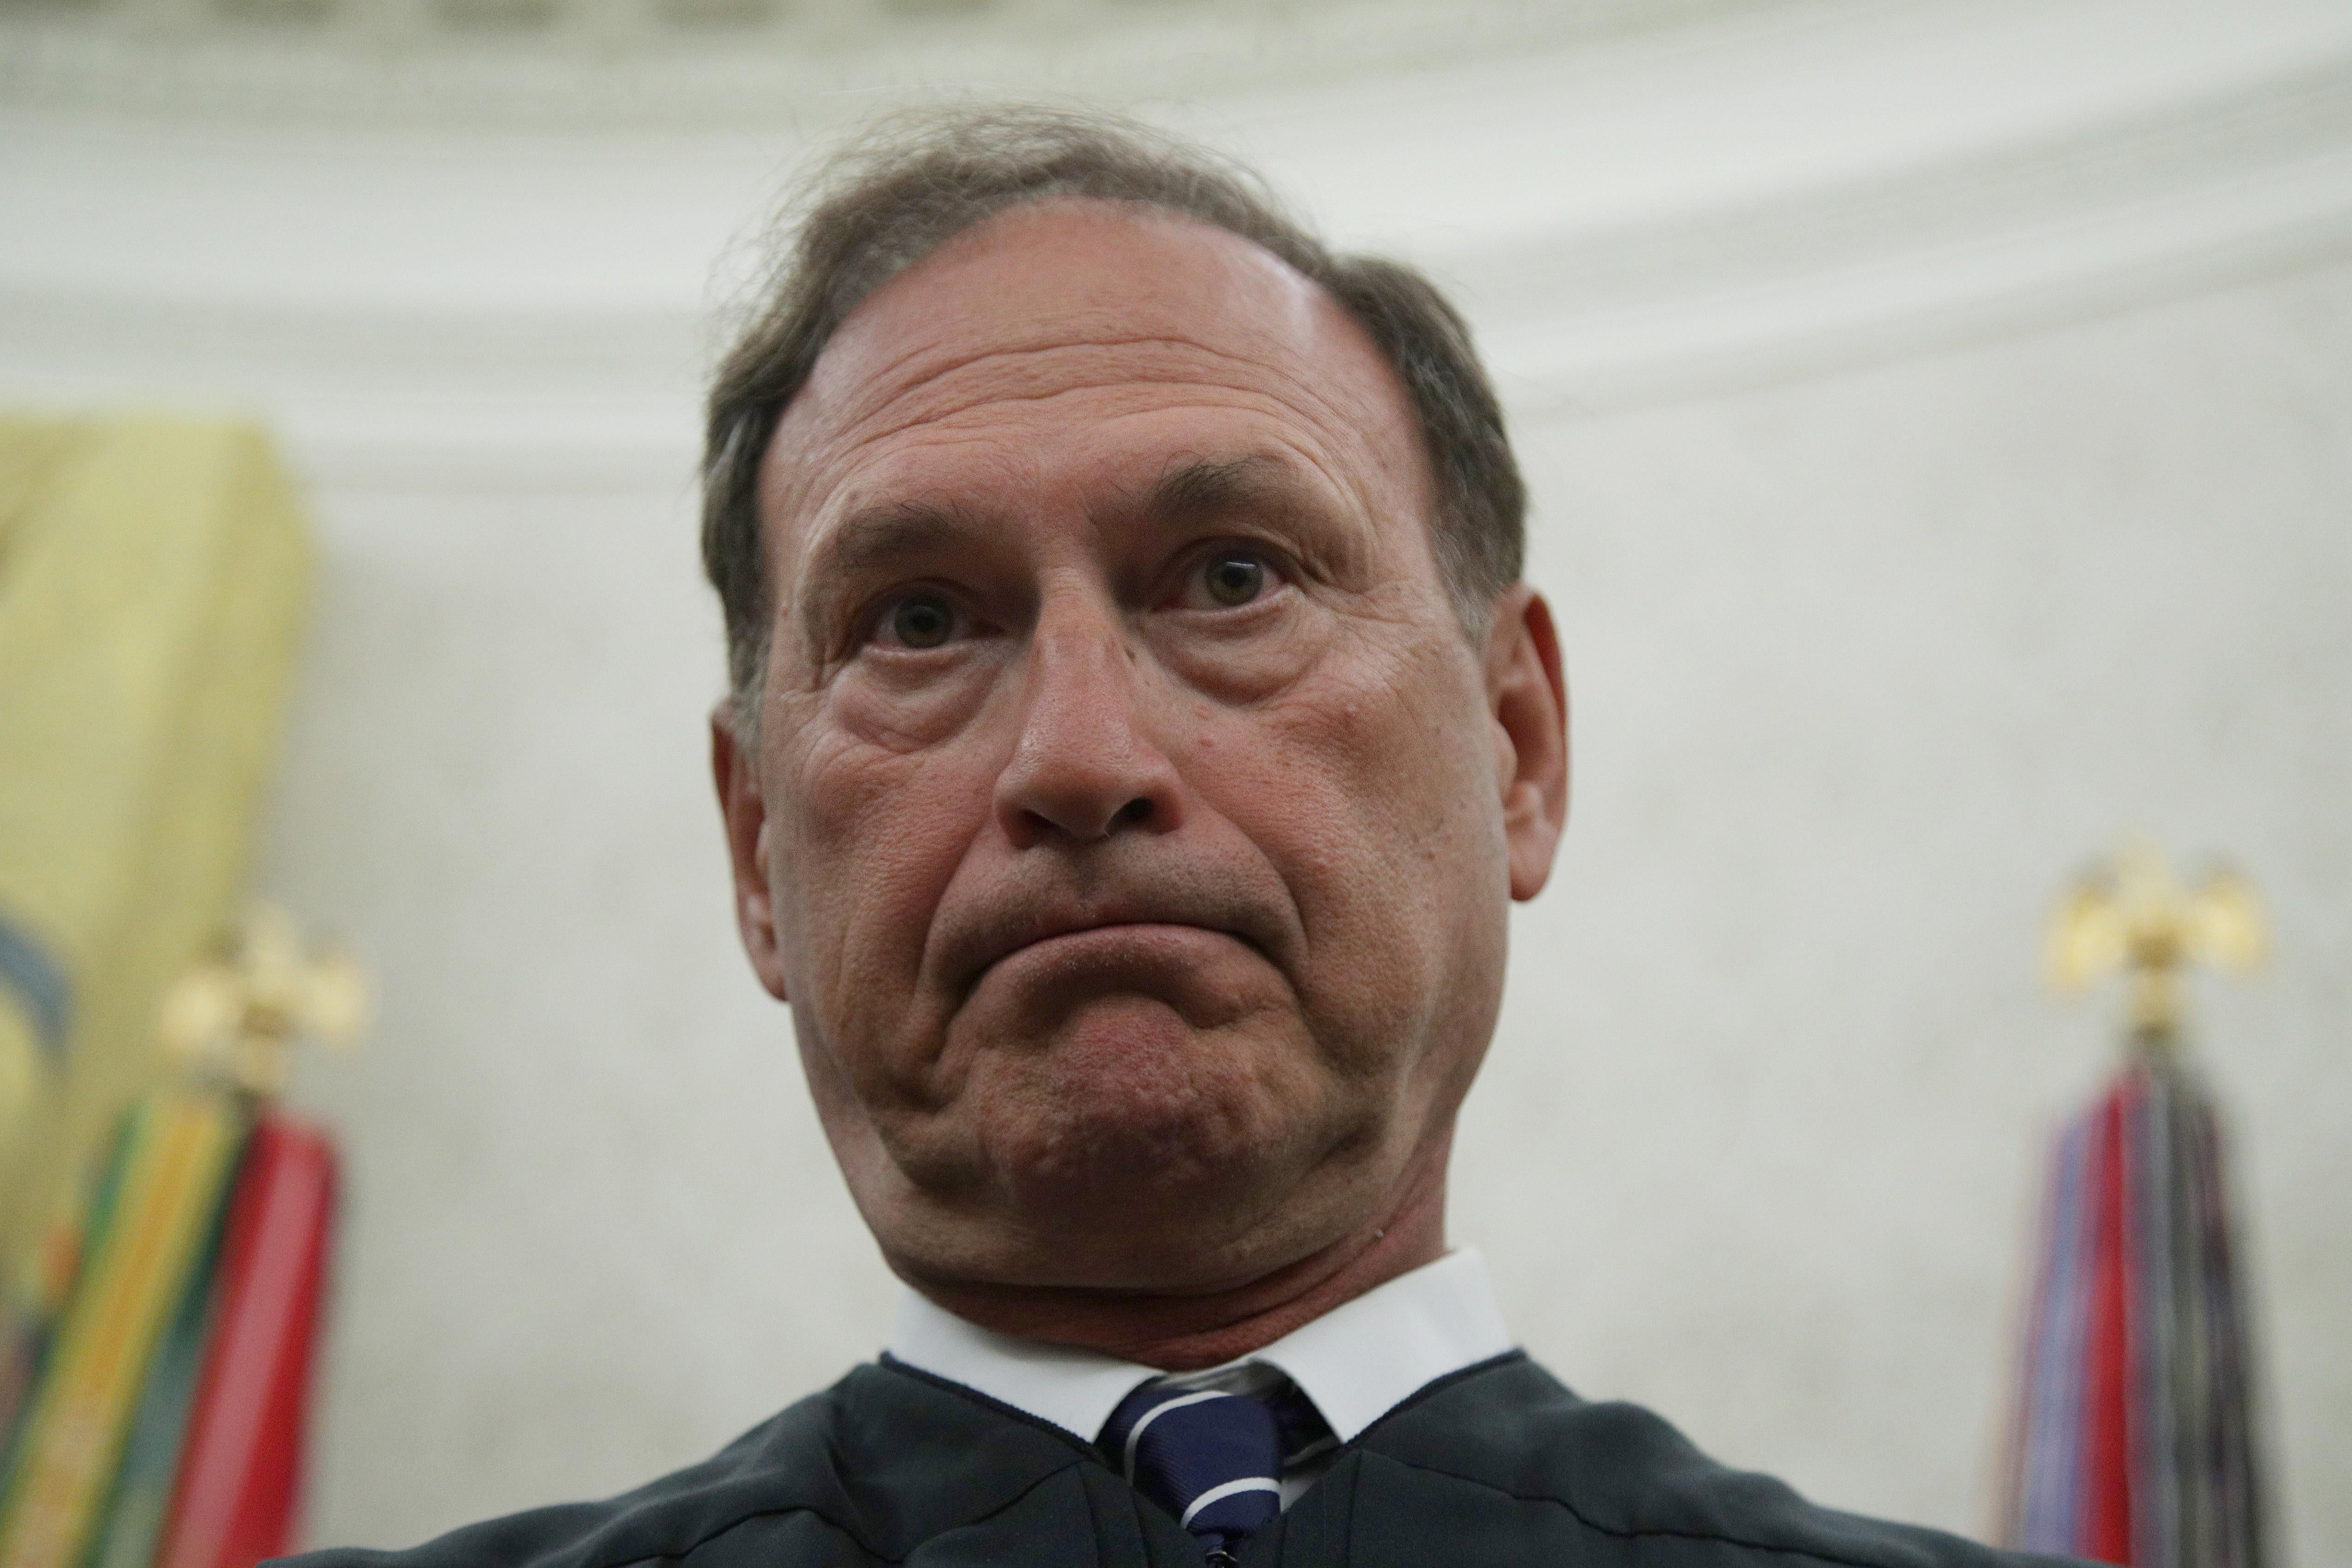 Supreme Court Justice Samuel Alito Flags His Right-Wing Views David Plotz, Emily Bazelon, and John Dickerson